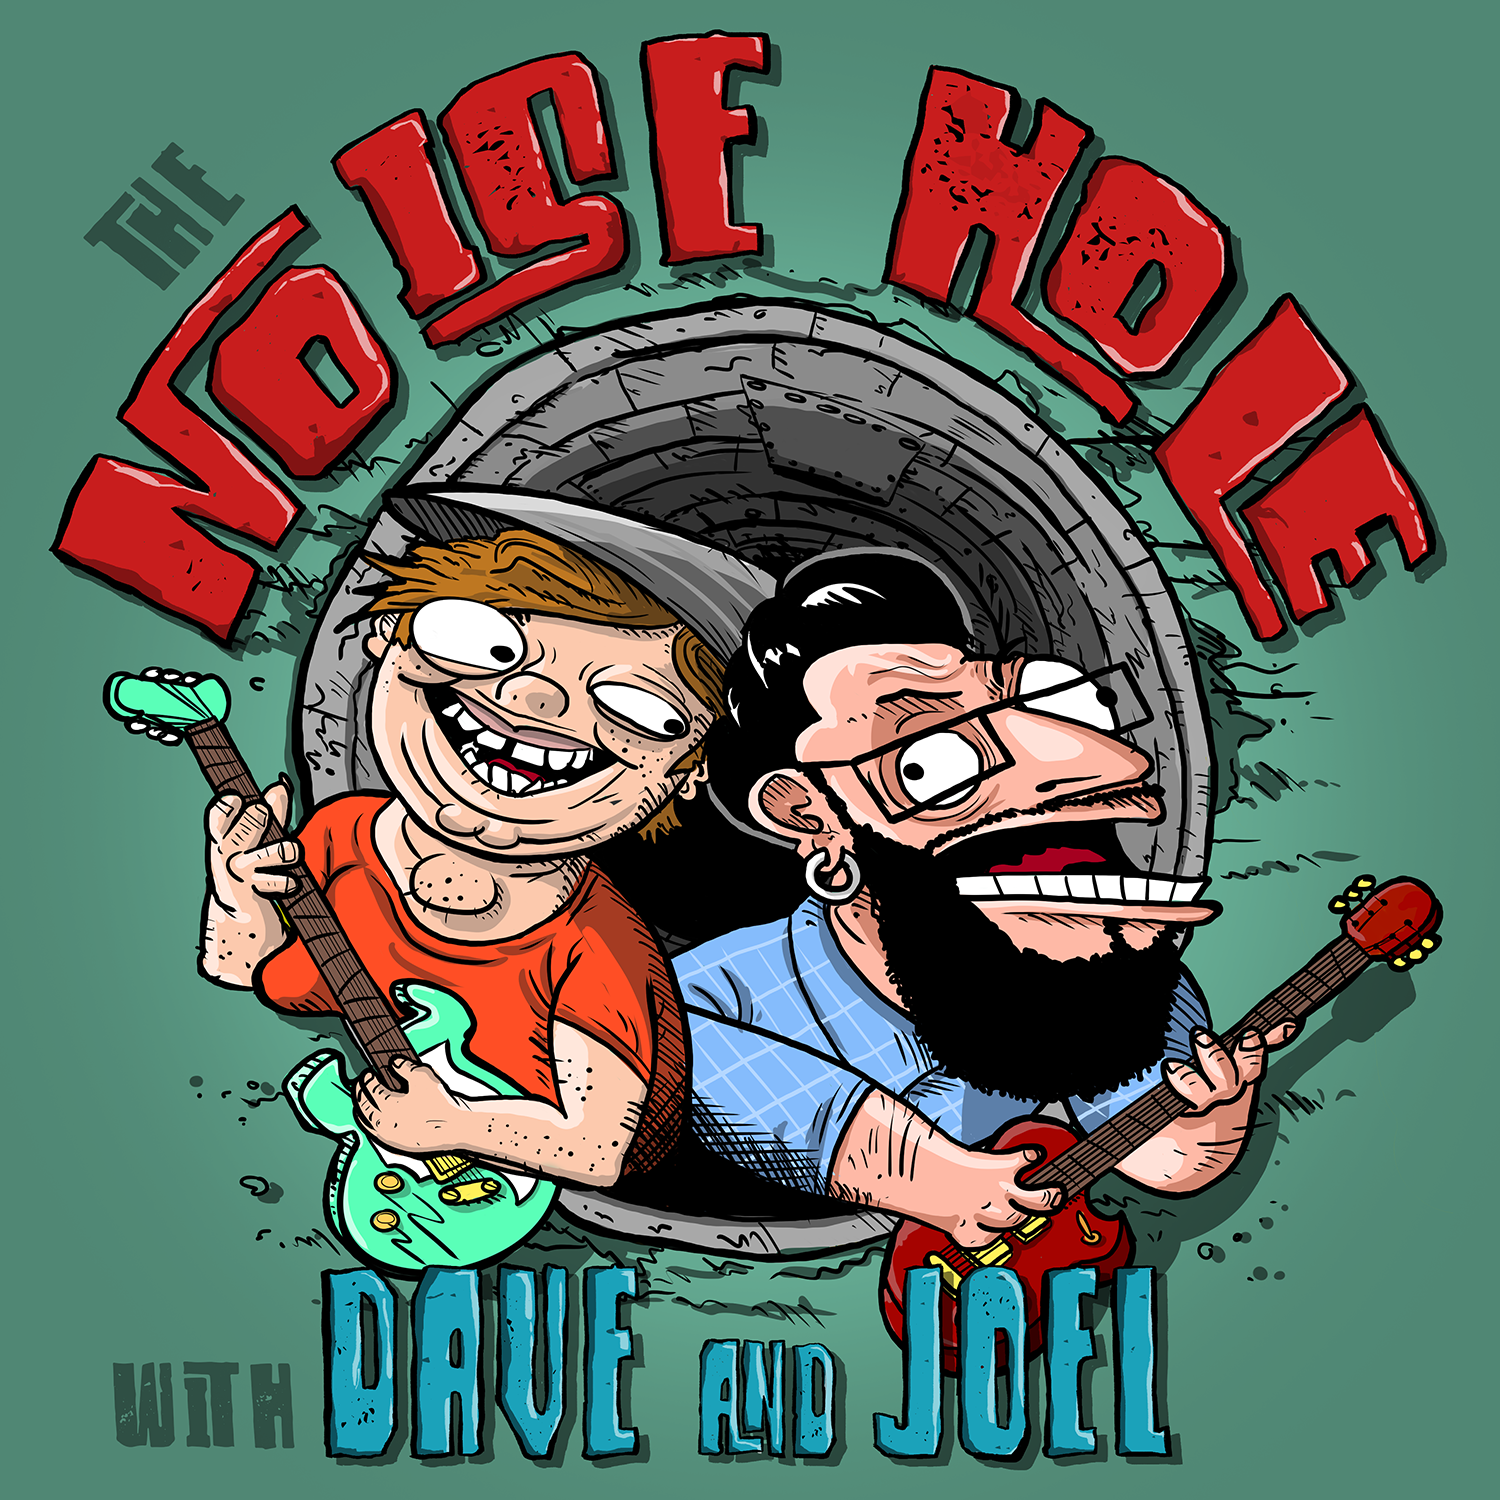 The Noise Hole with Dave & Joel - A rock and roll comedy podcast featuring Joel Watson and Dave McElfatrick of Cyanide & Happiness